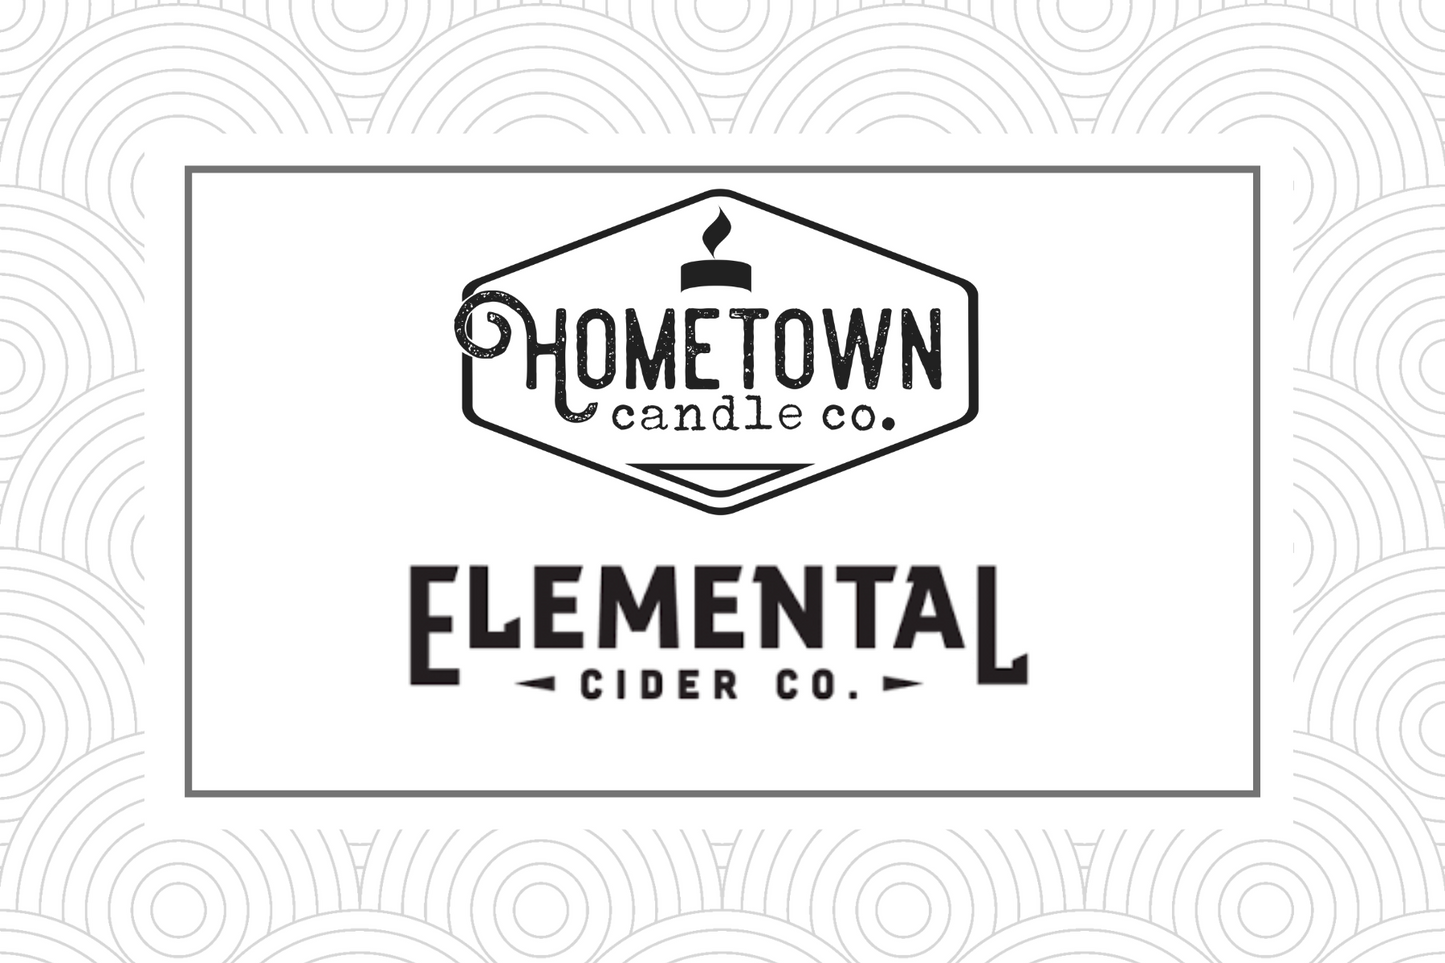 June 24th -  Sip & Pour - Candle Making at Elemental Cider